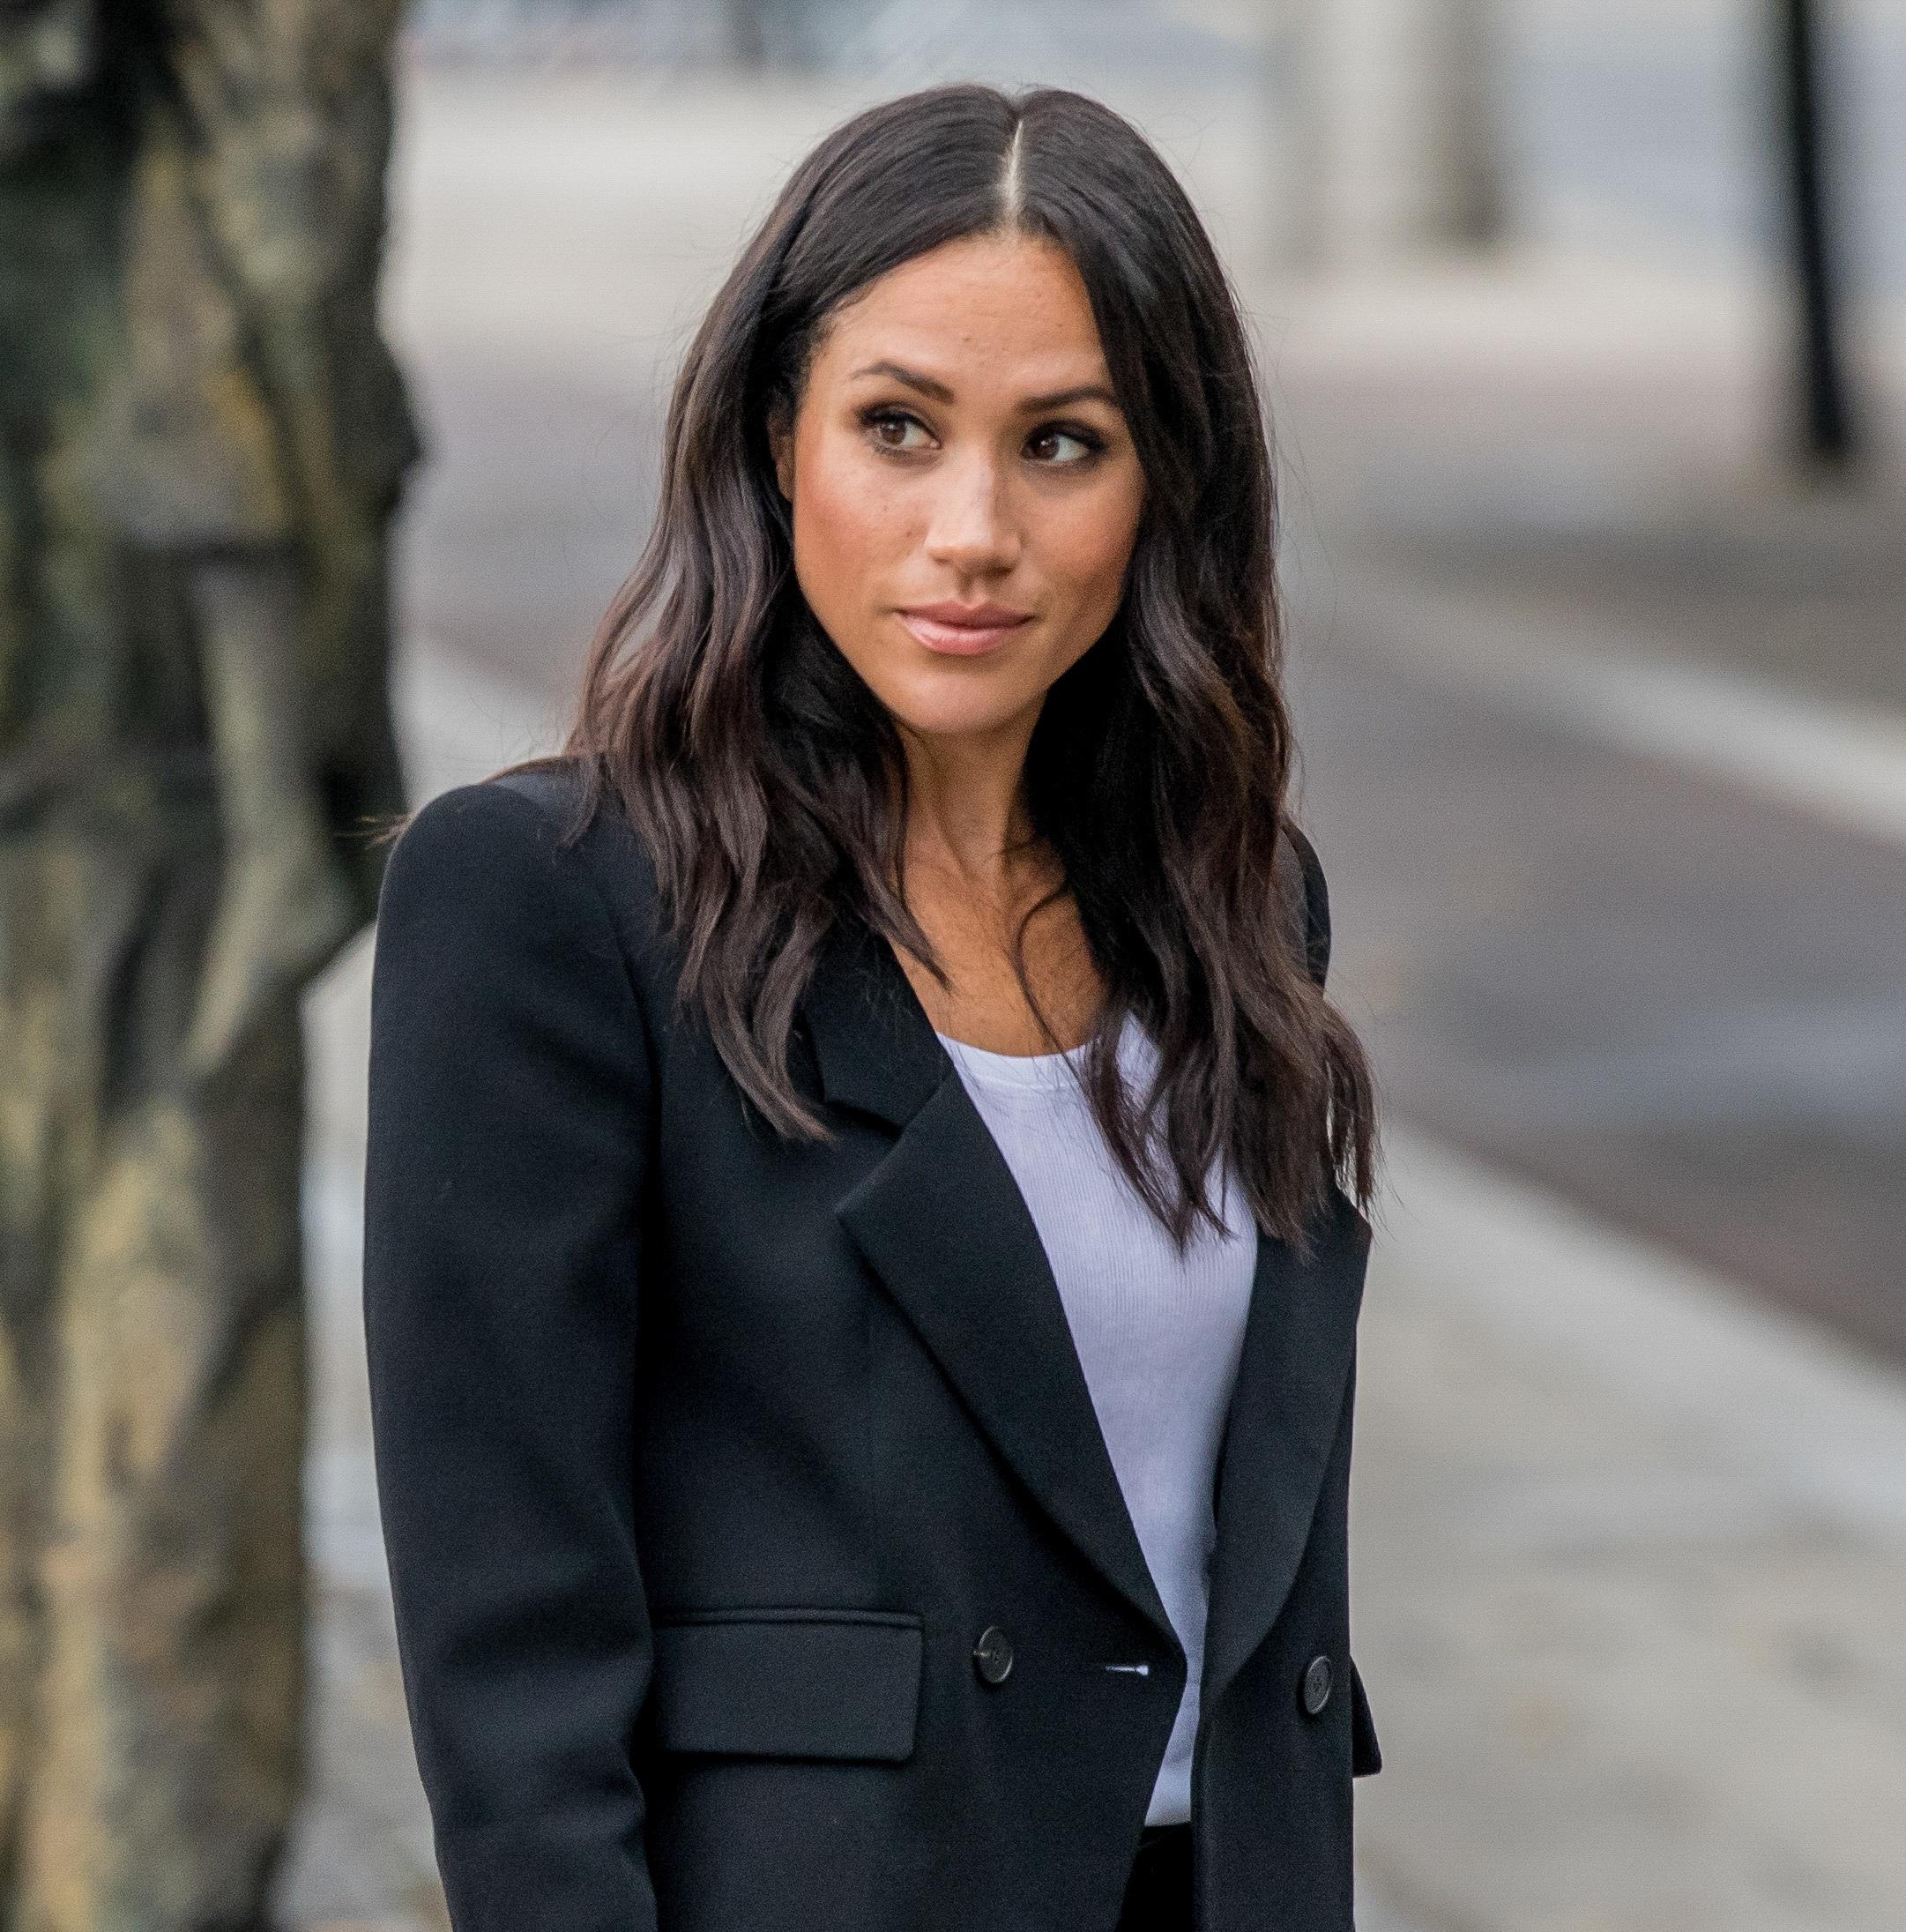 Meghan Markle out and about in a black suit and white inner outfit.